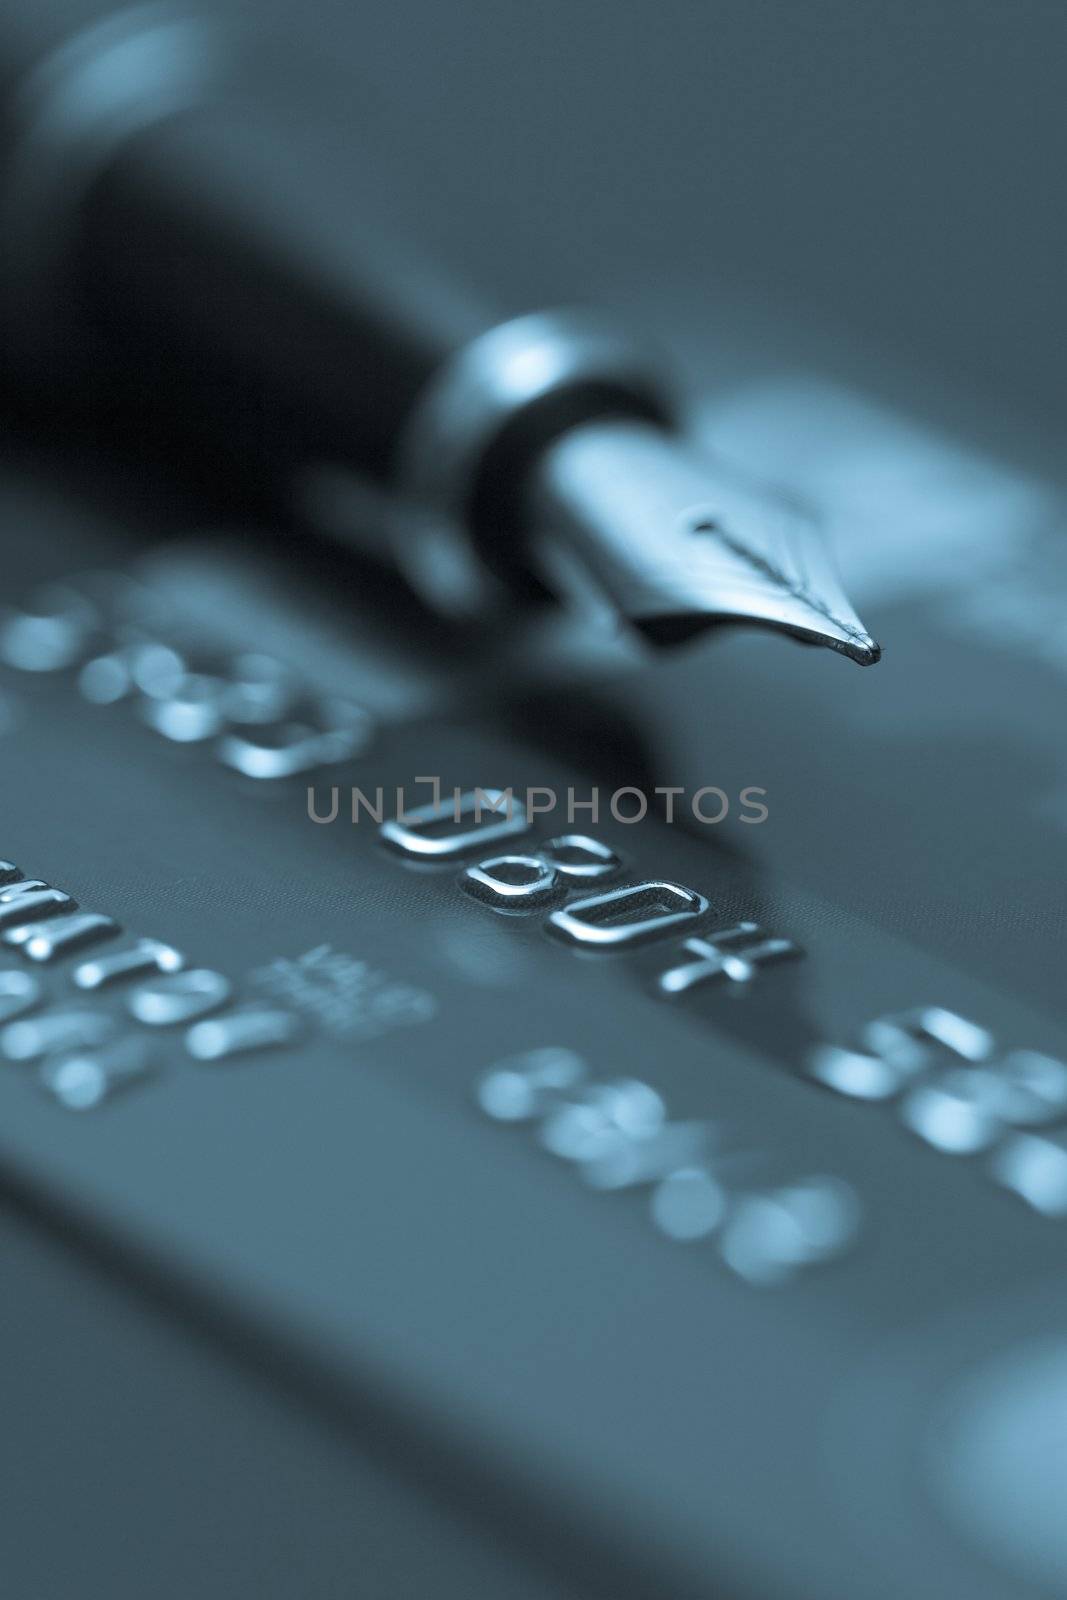 Image of money, credit cards, checks and coins